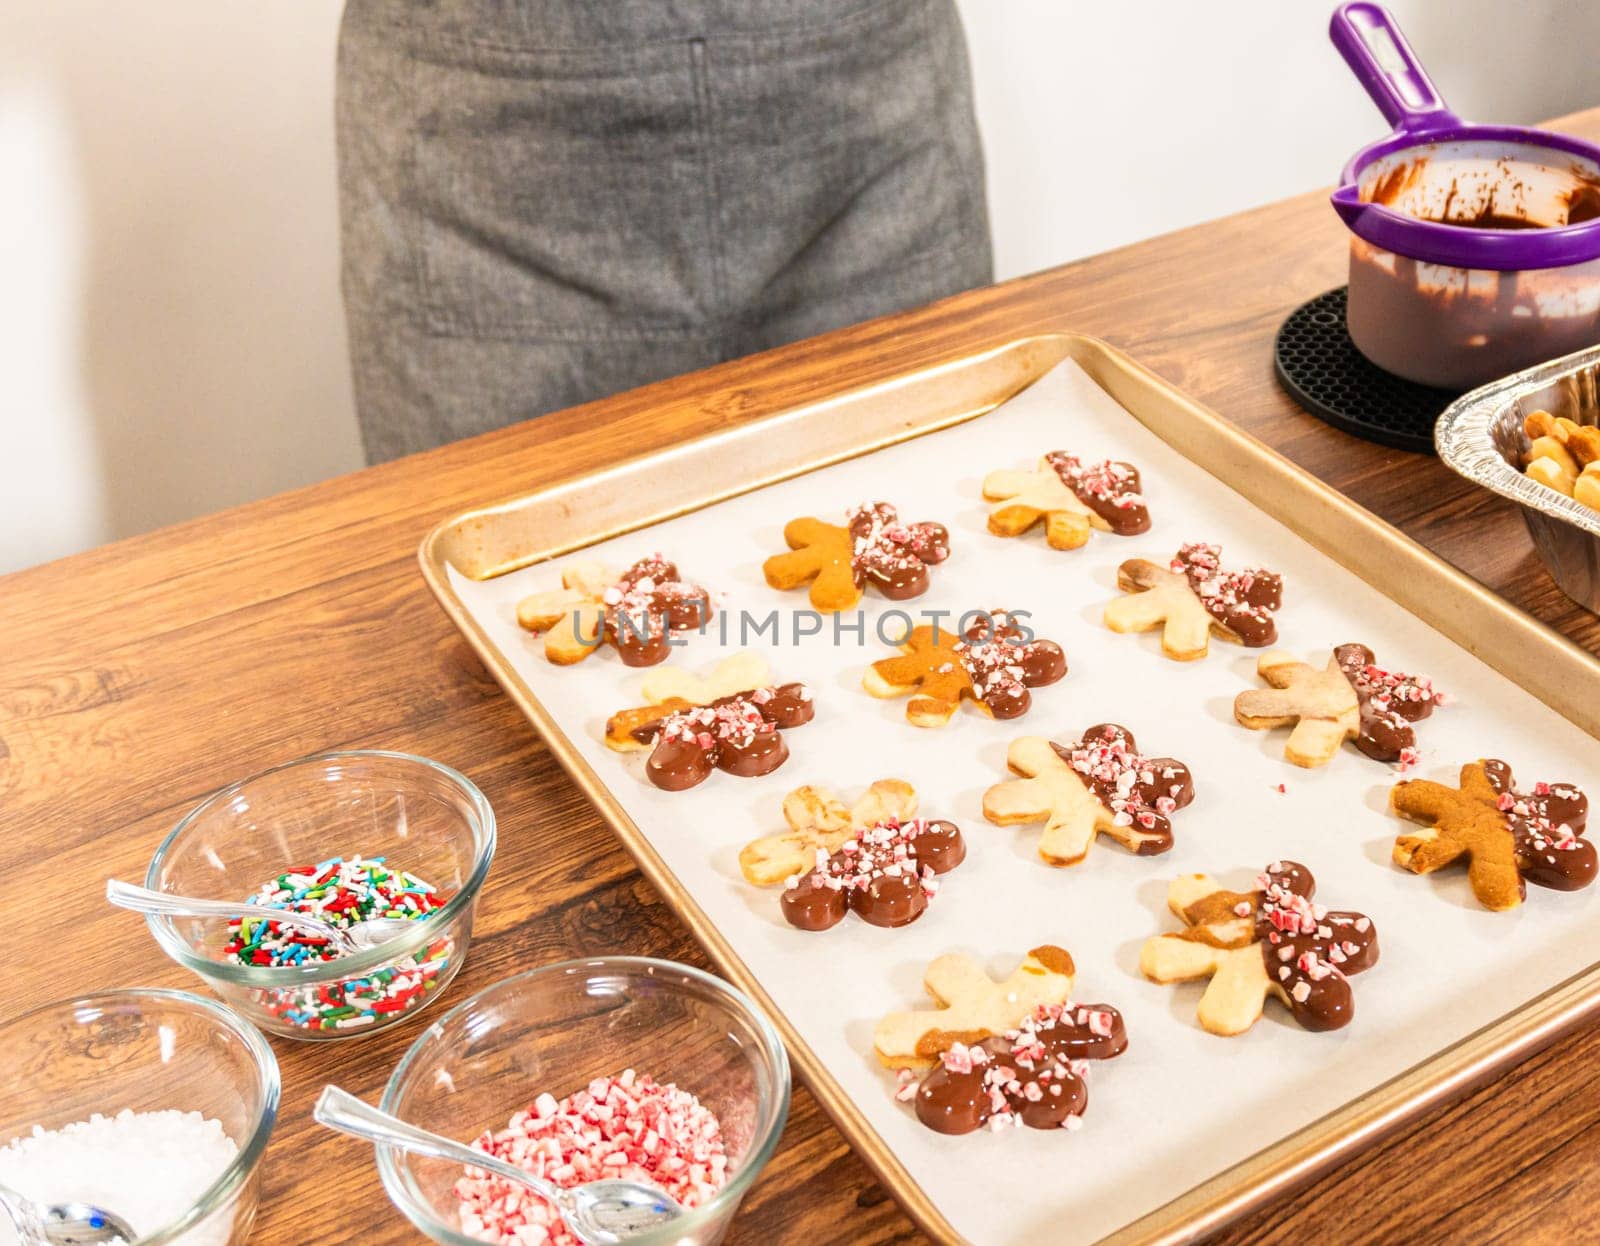 Preparing star-shaped cookies, half-dipped in chocolate, accented with peppermint chocolate chips for the holidays.